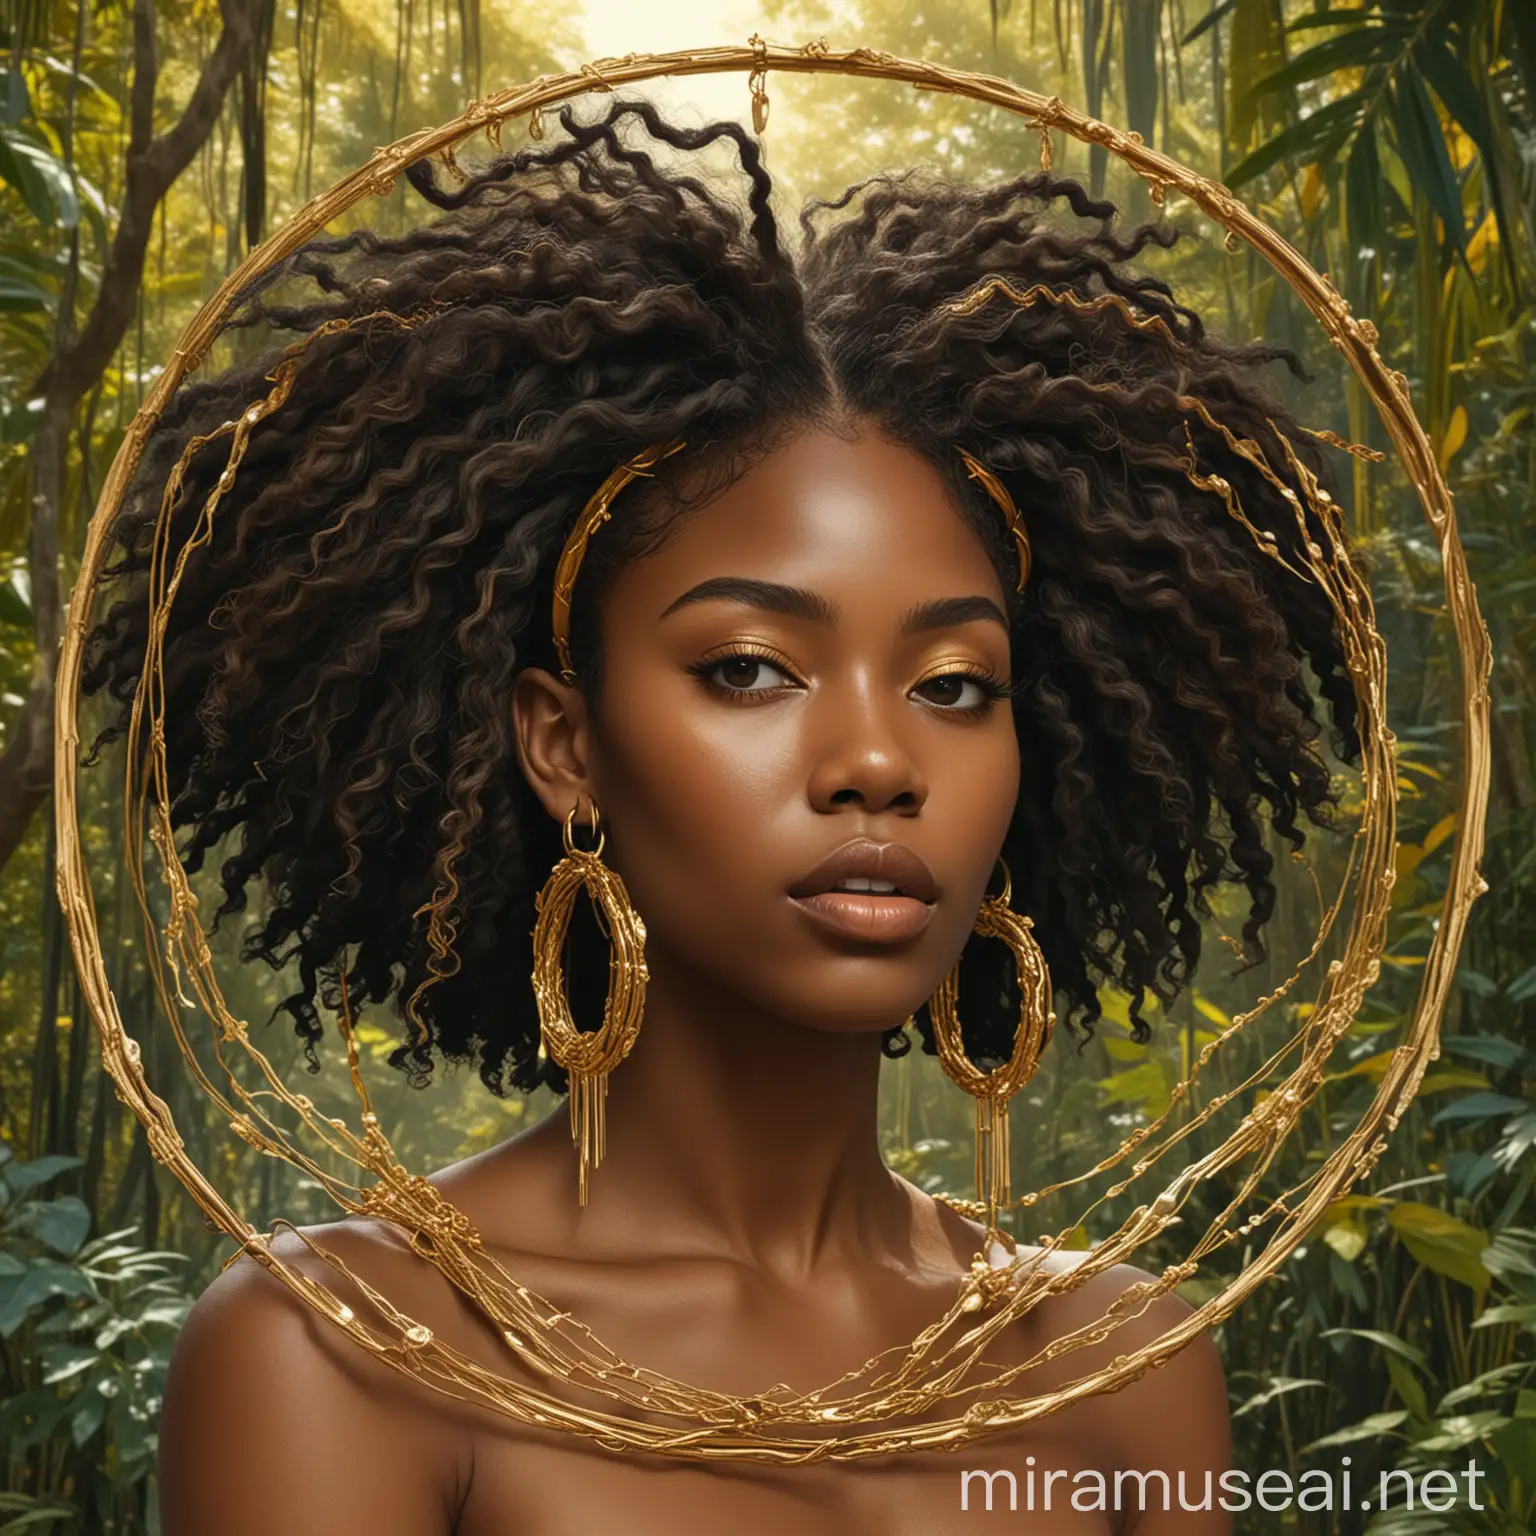 Empowered Black Woman with Golden Adornments Standing Proud in Jungle Breeze